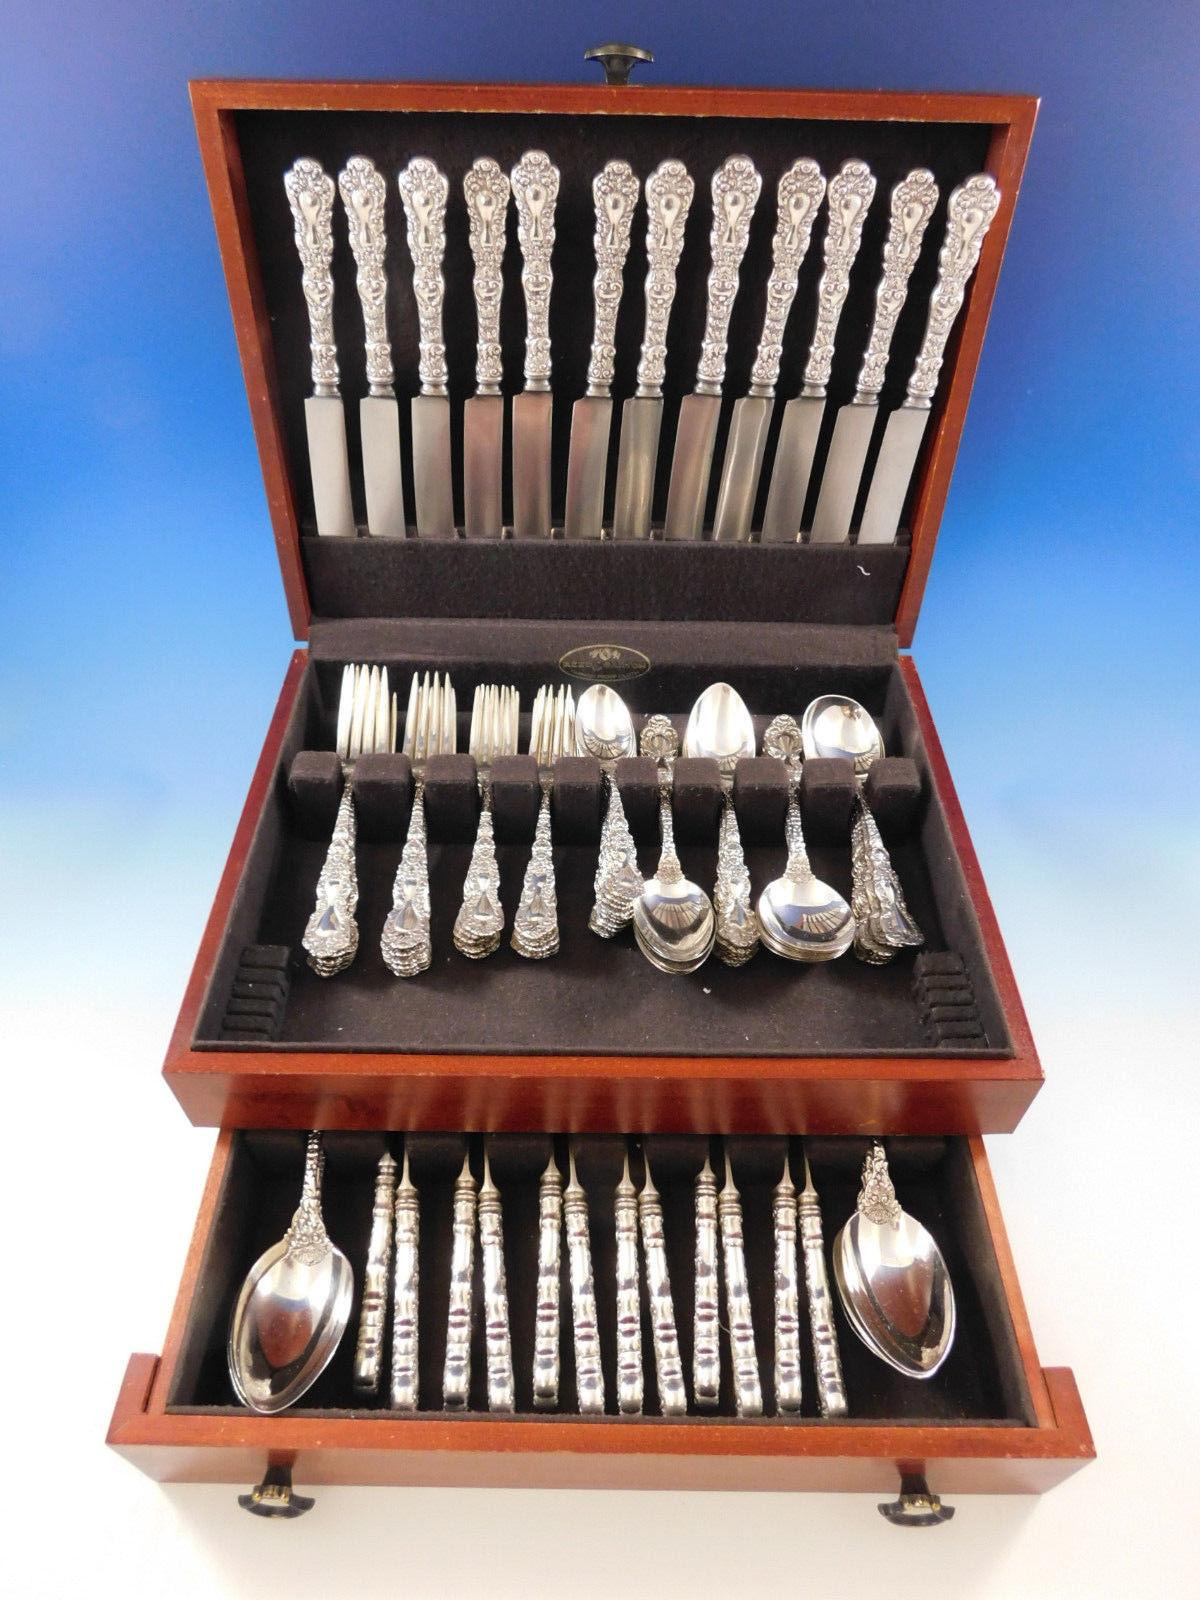 Superb monumental dinner and luncheon size imperial chrysanthemum by Gorham sterling silver flatware set, 96 pieces. This set includes:

12 dinner size knives, 10